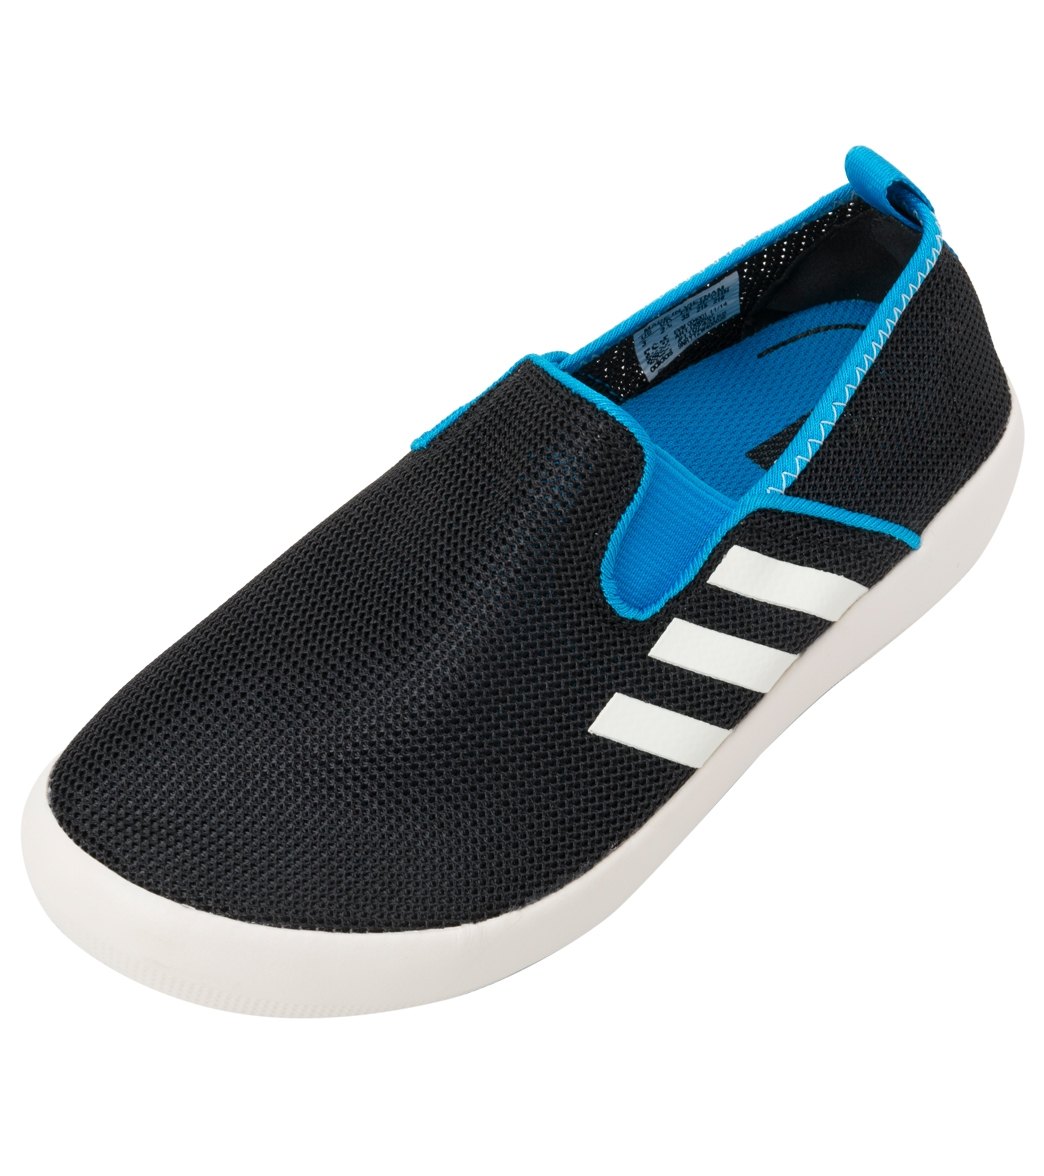 adidas kids boat slip on water shoes